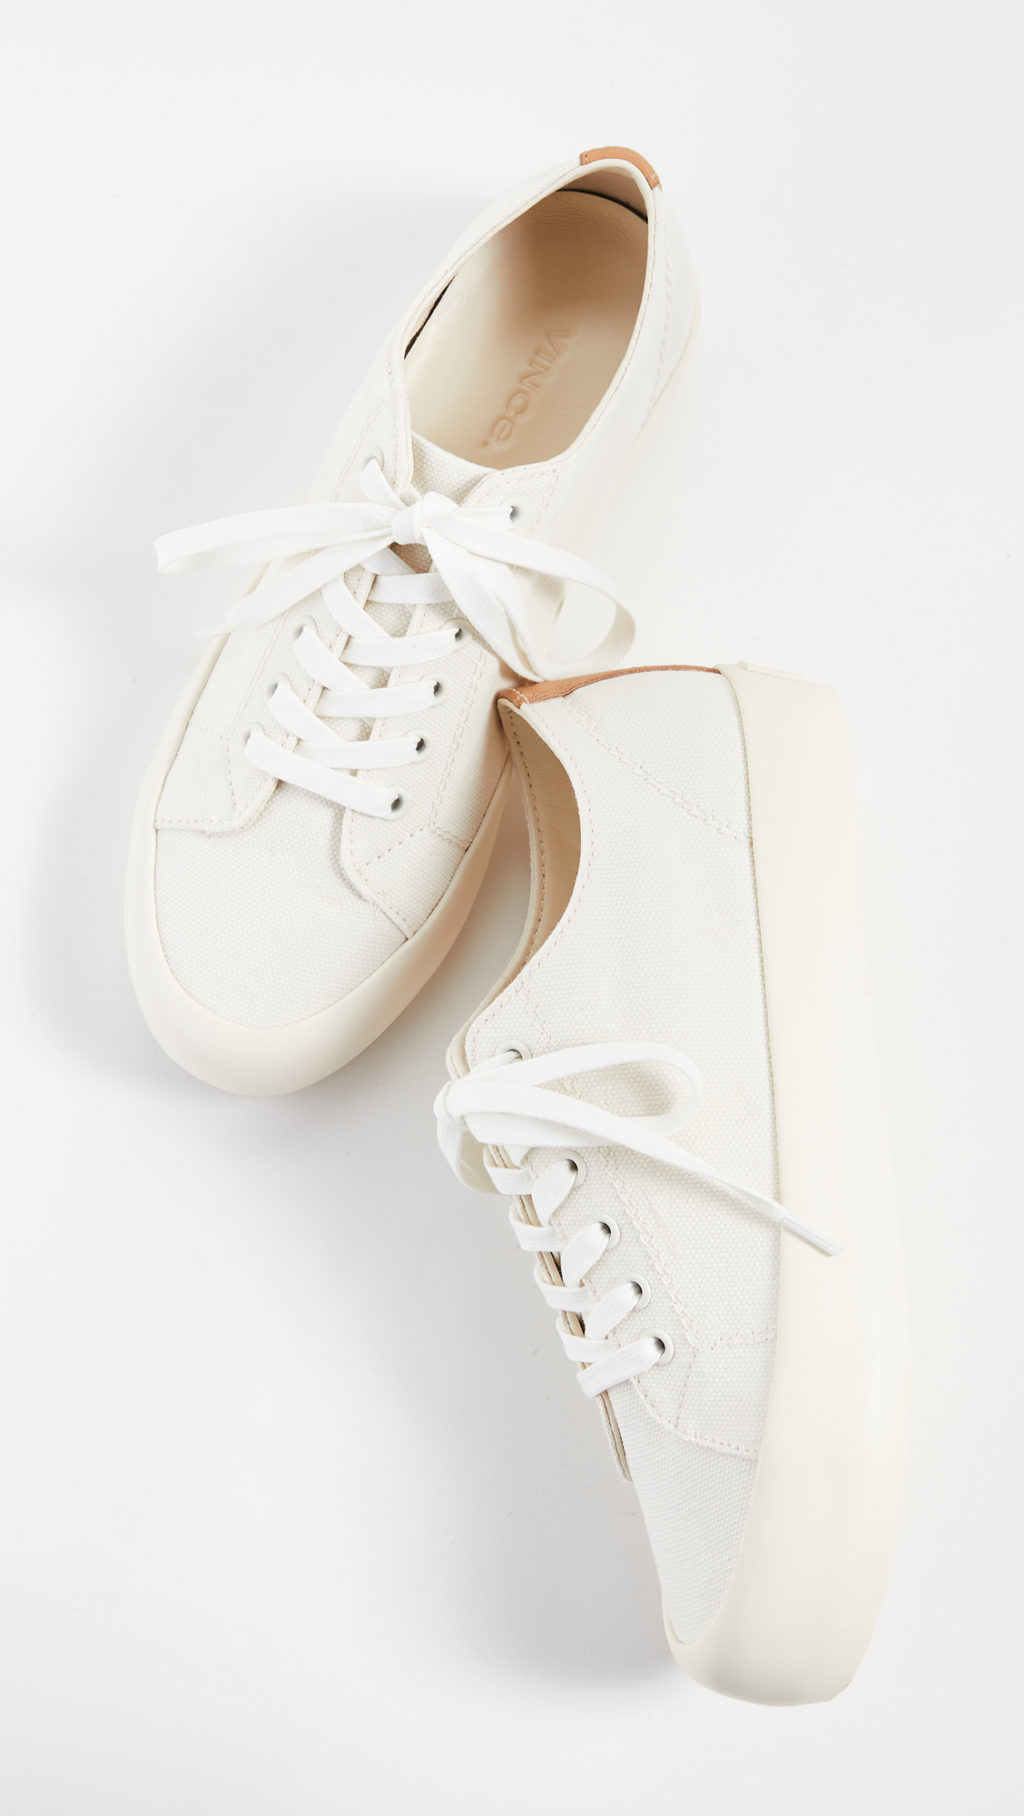 My Favorite White Sneakers From Splurge to Save | Hello Fashion